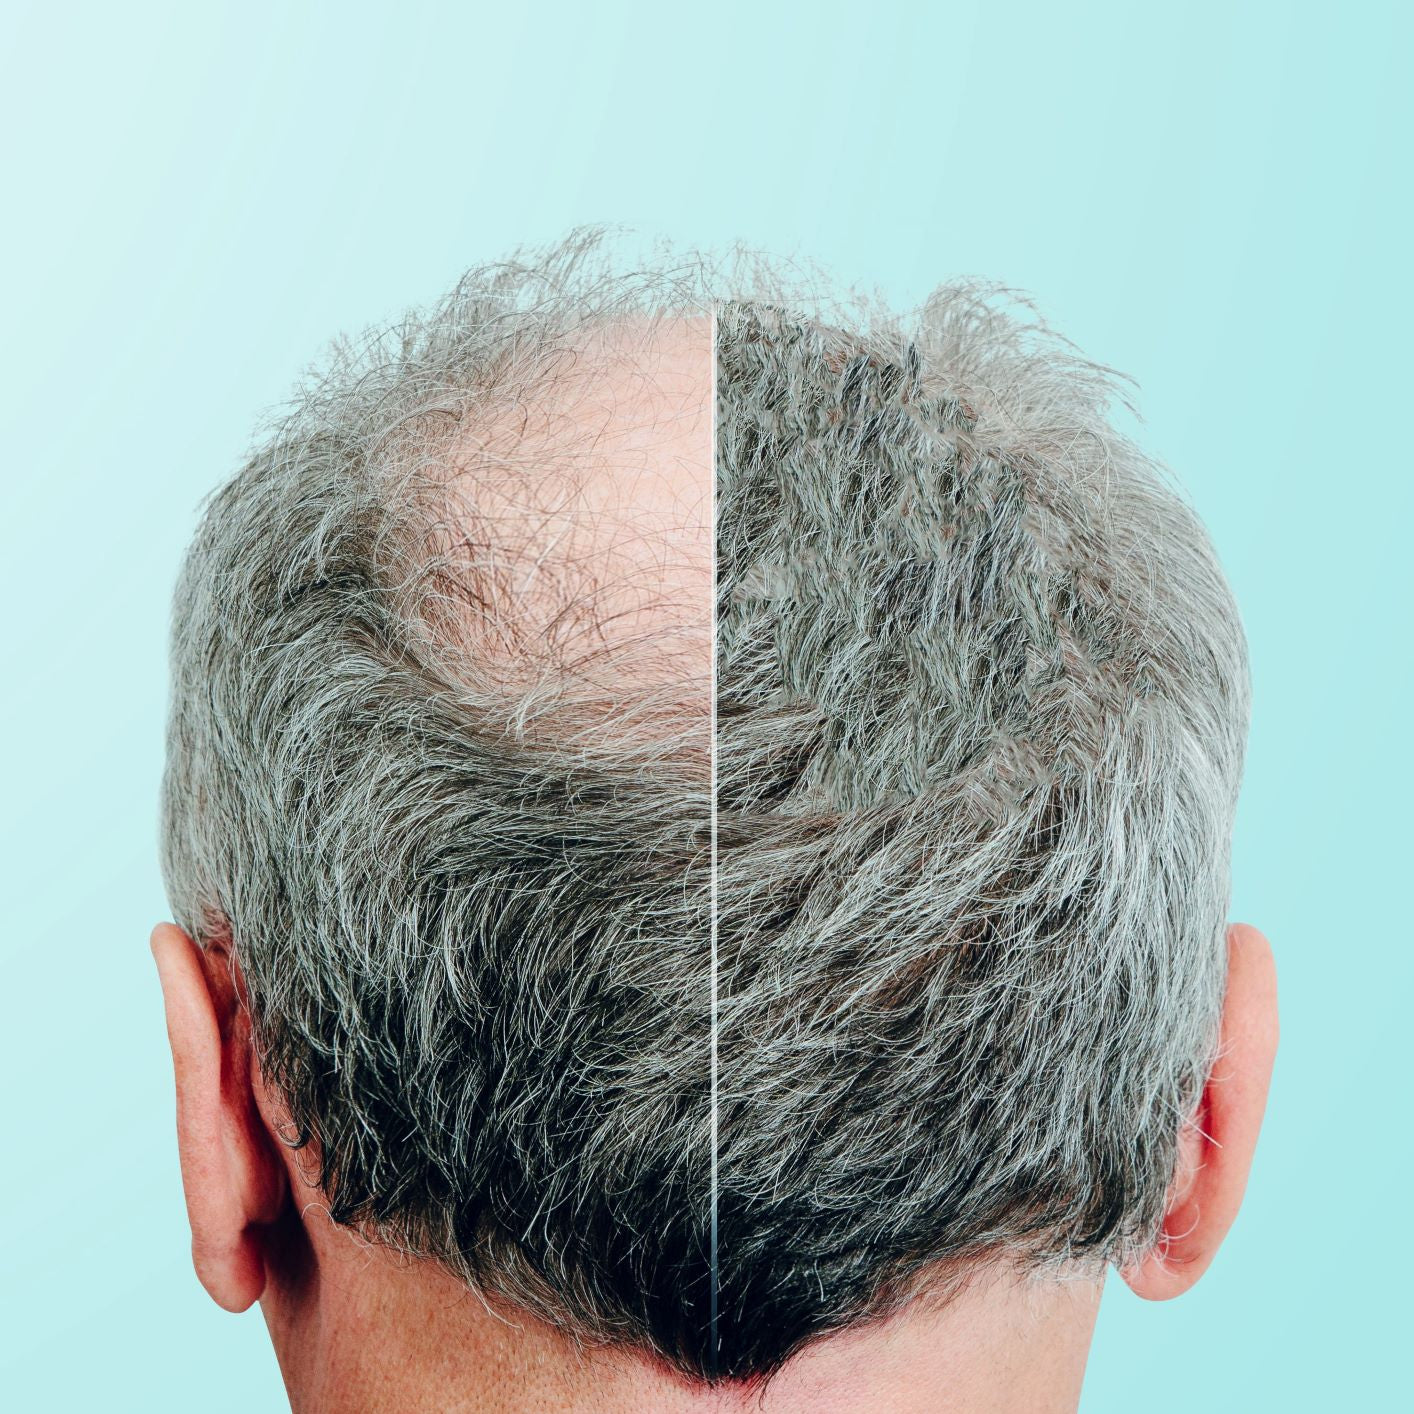 Finasteride Before and After Images